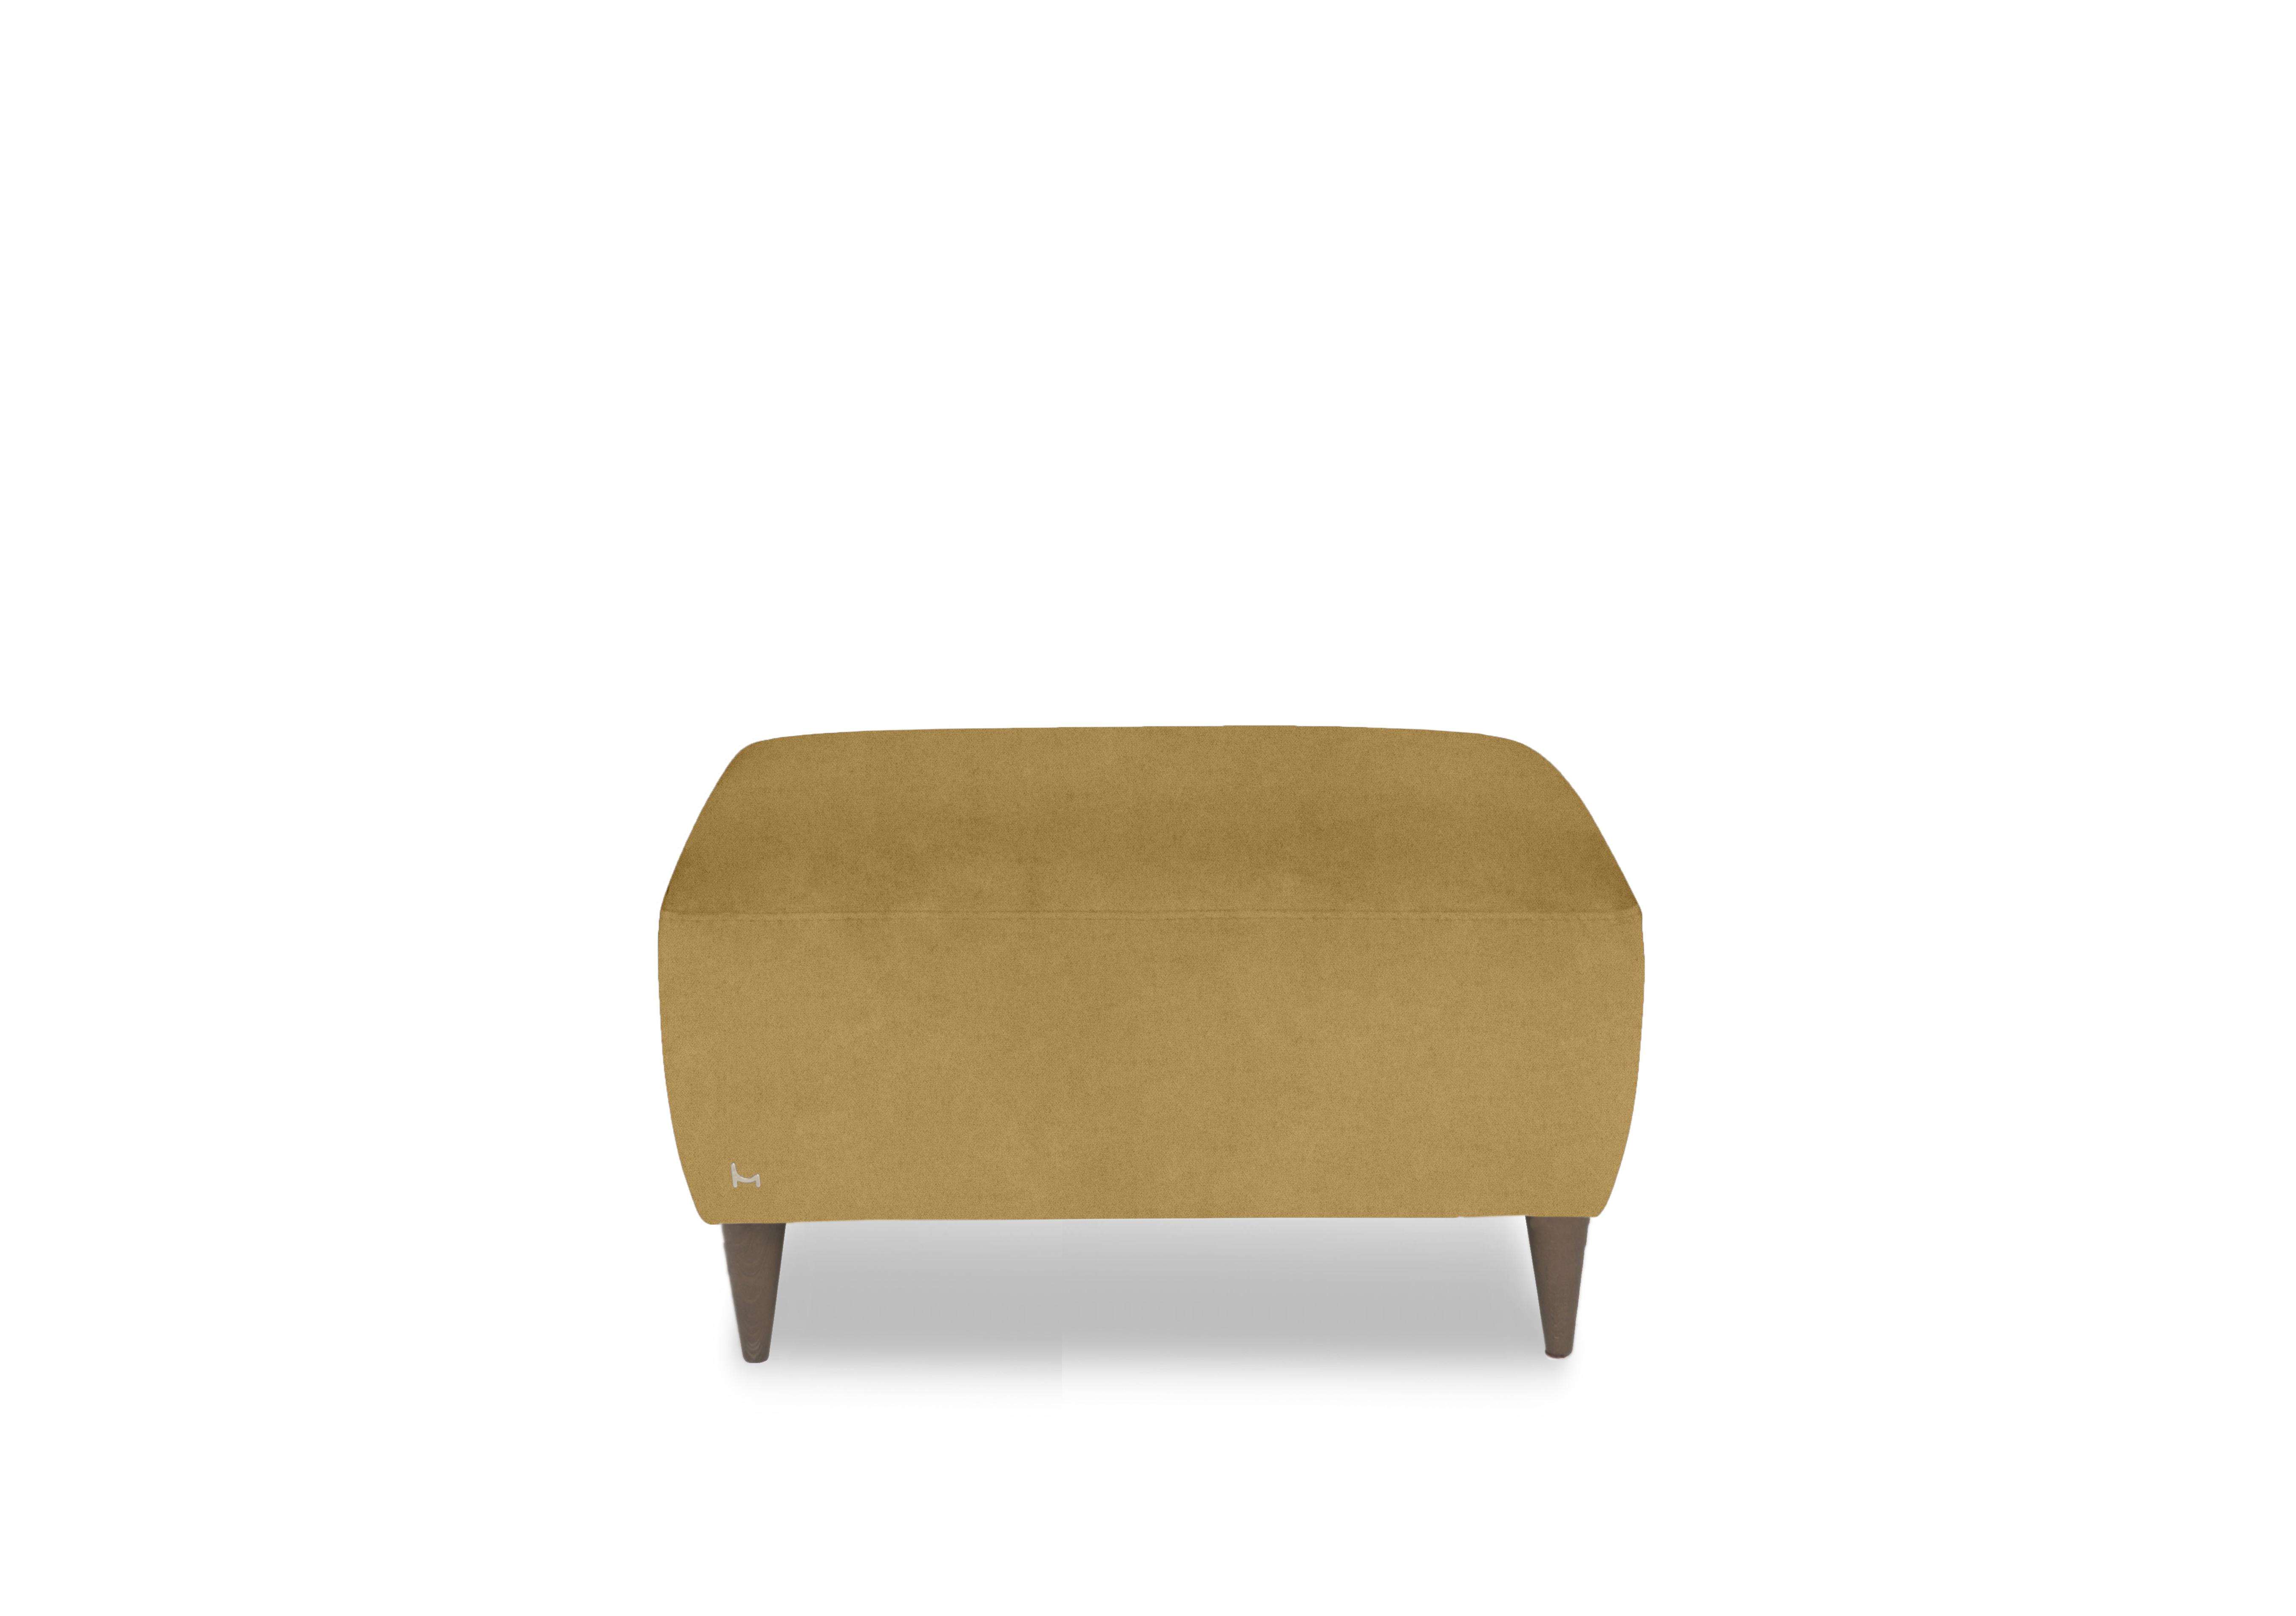 Milano Fabric Footstool in Fuente Mostaza To Ft on Furniture Village